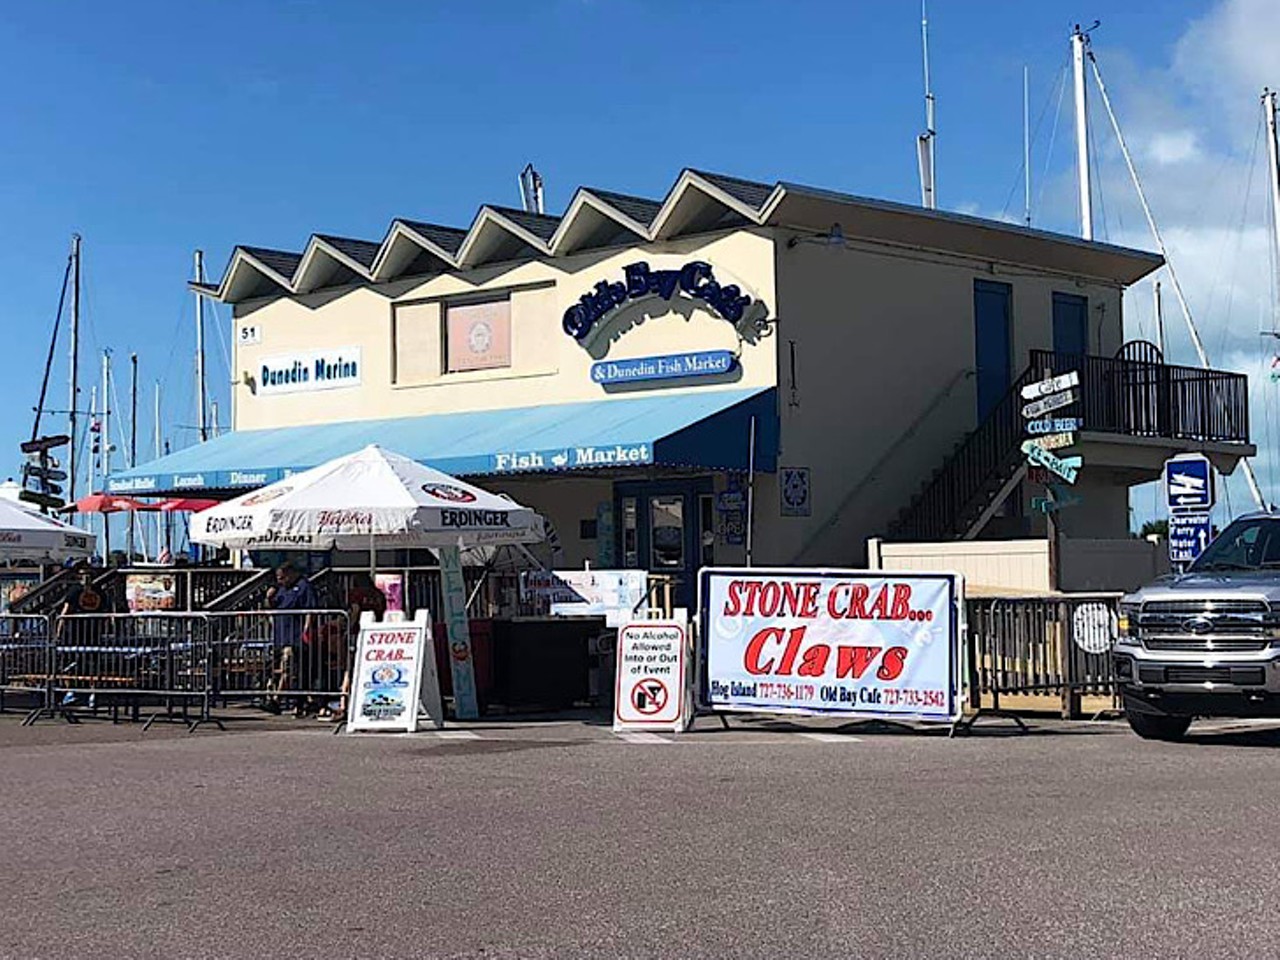 Olde Bay Caf&eacute;
51 Main St, Dunedin, FL
Located on the marina, Olde Bay is known for serving seafood and other items that aren&#146;t fried which they take pride in. They also have a fish market located in the same building in case you want a fresh catch to take home. 
Photo via Olde Bay Caf&eacute;/Facebook